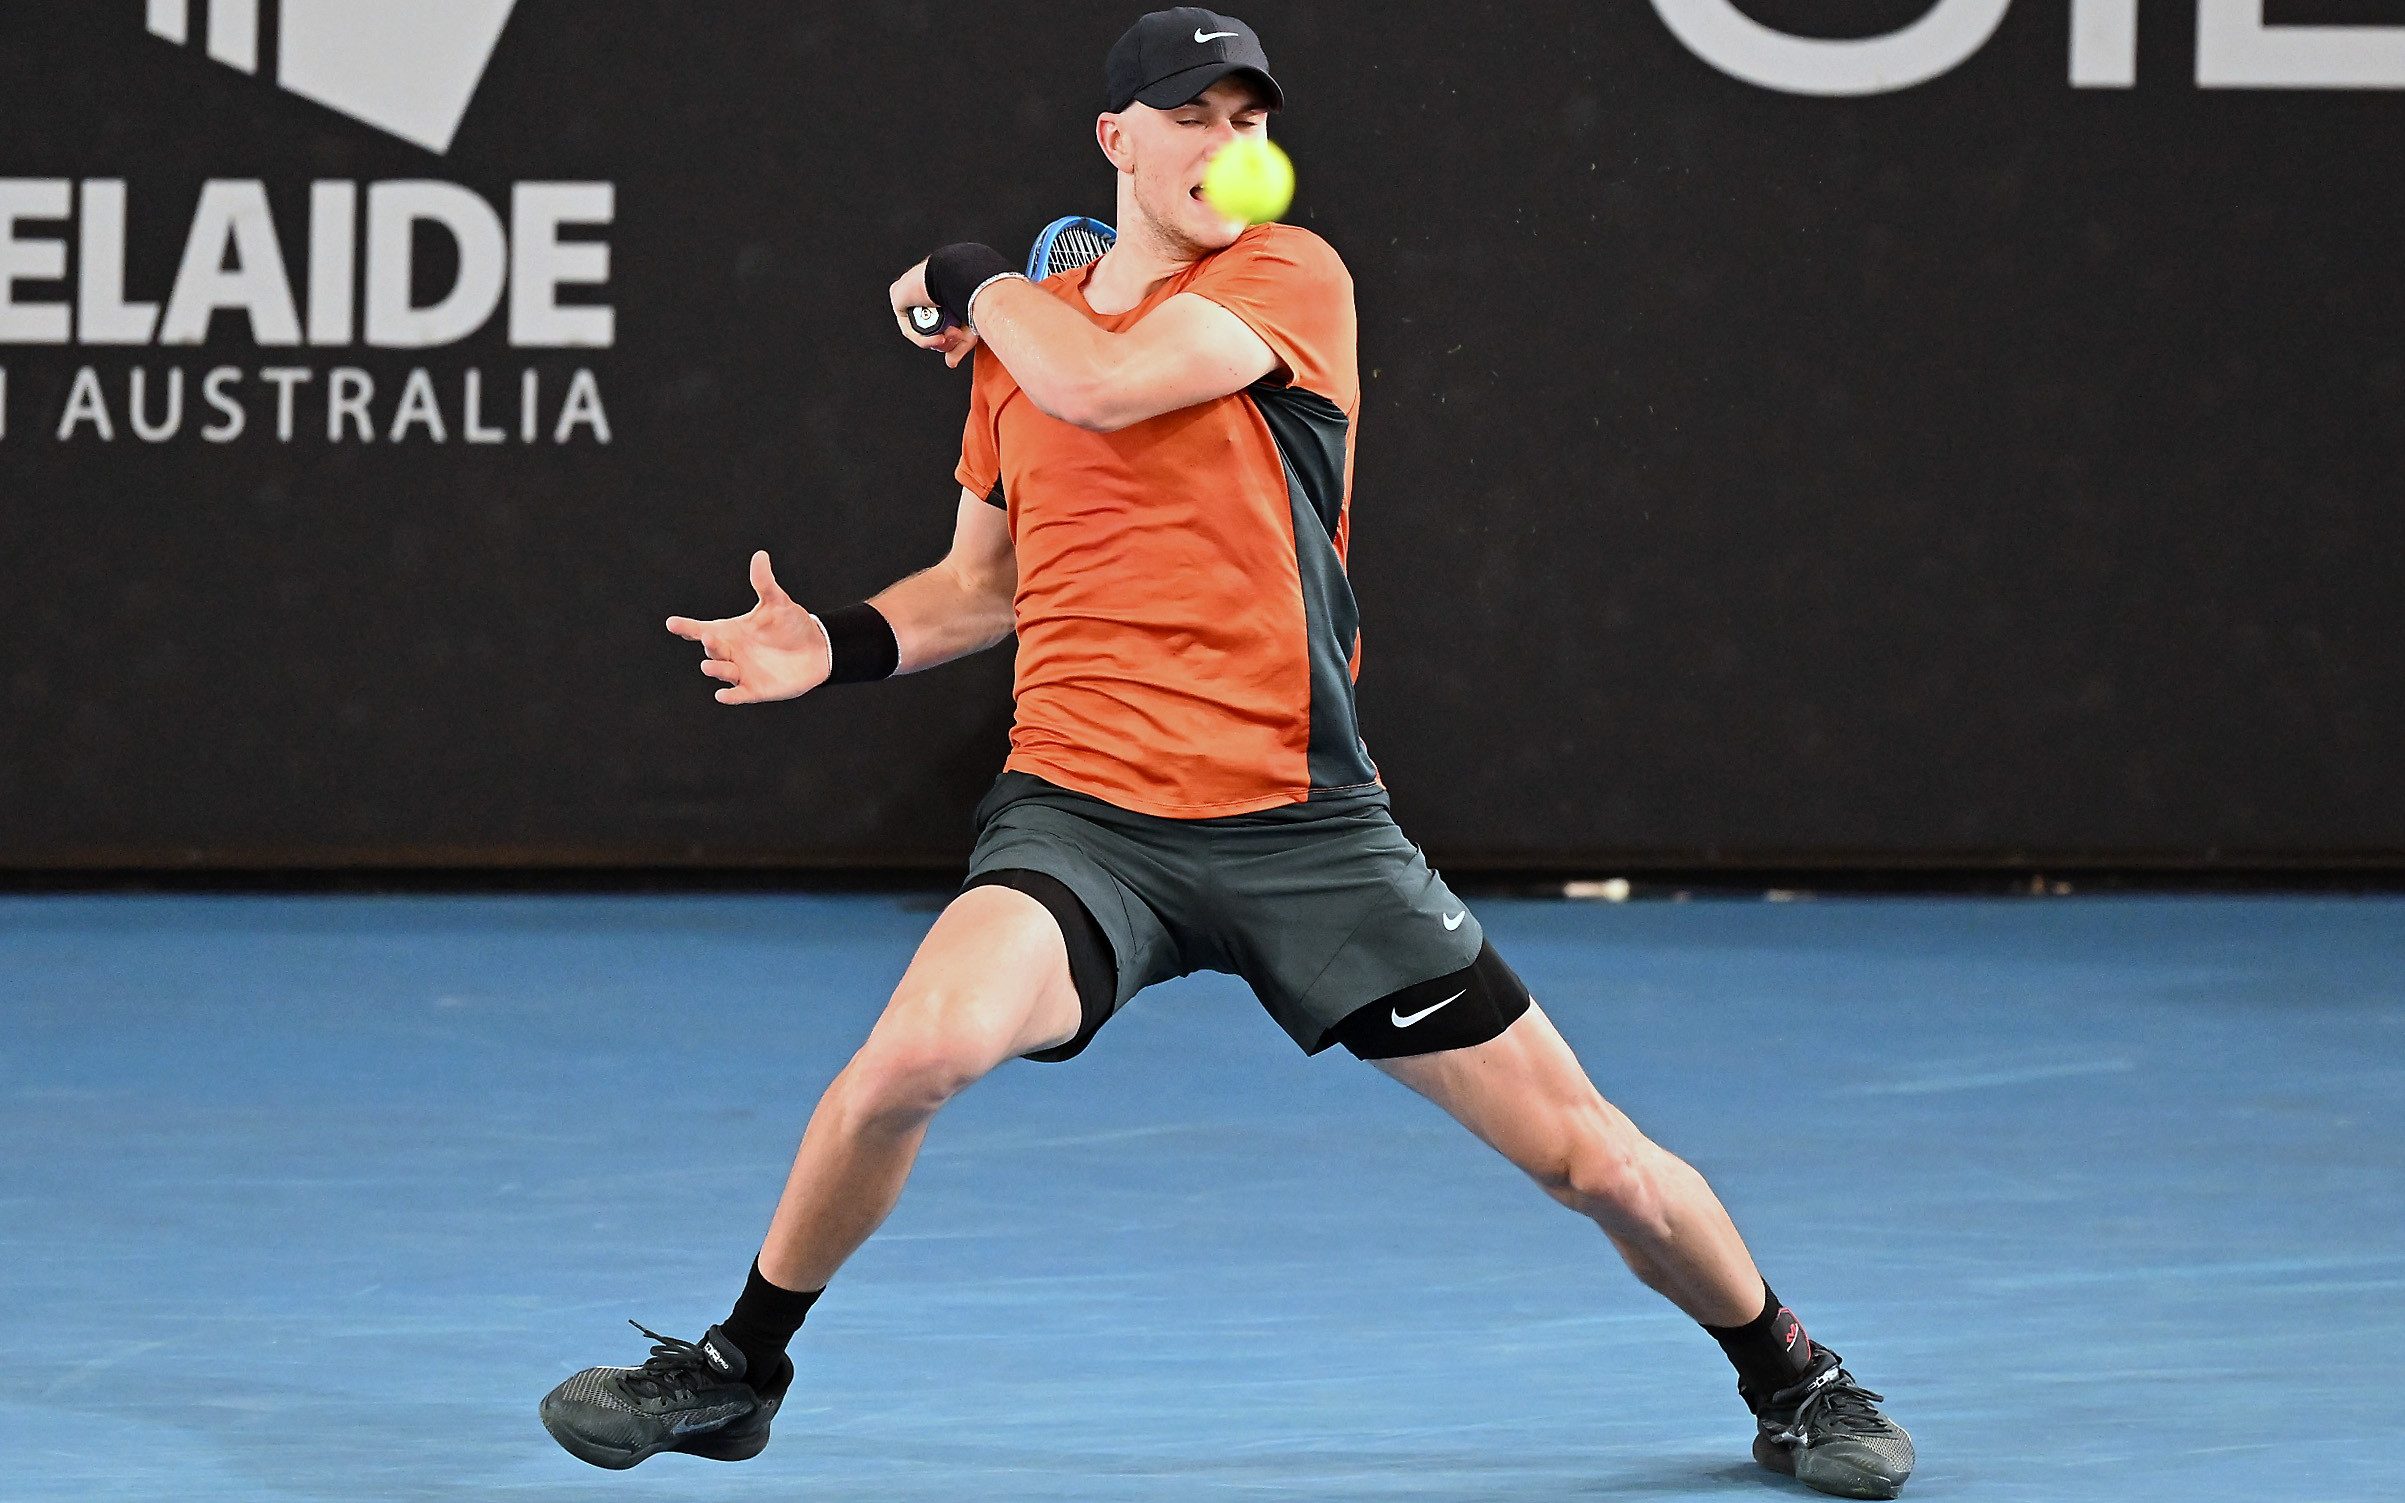 jack draper’s storming atp run shows why he can crack world’s top 20